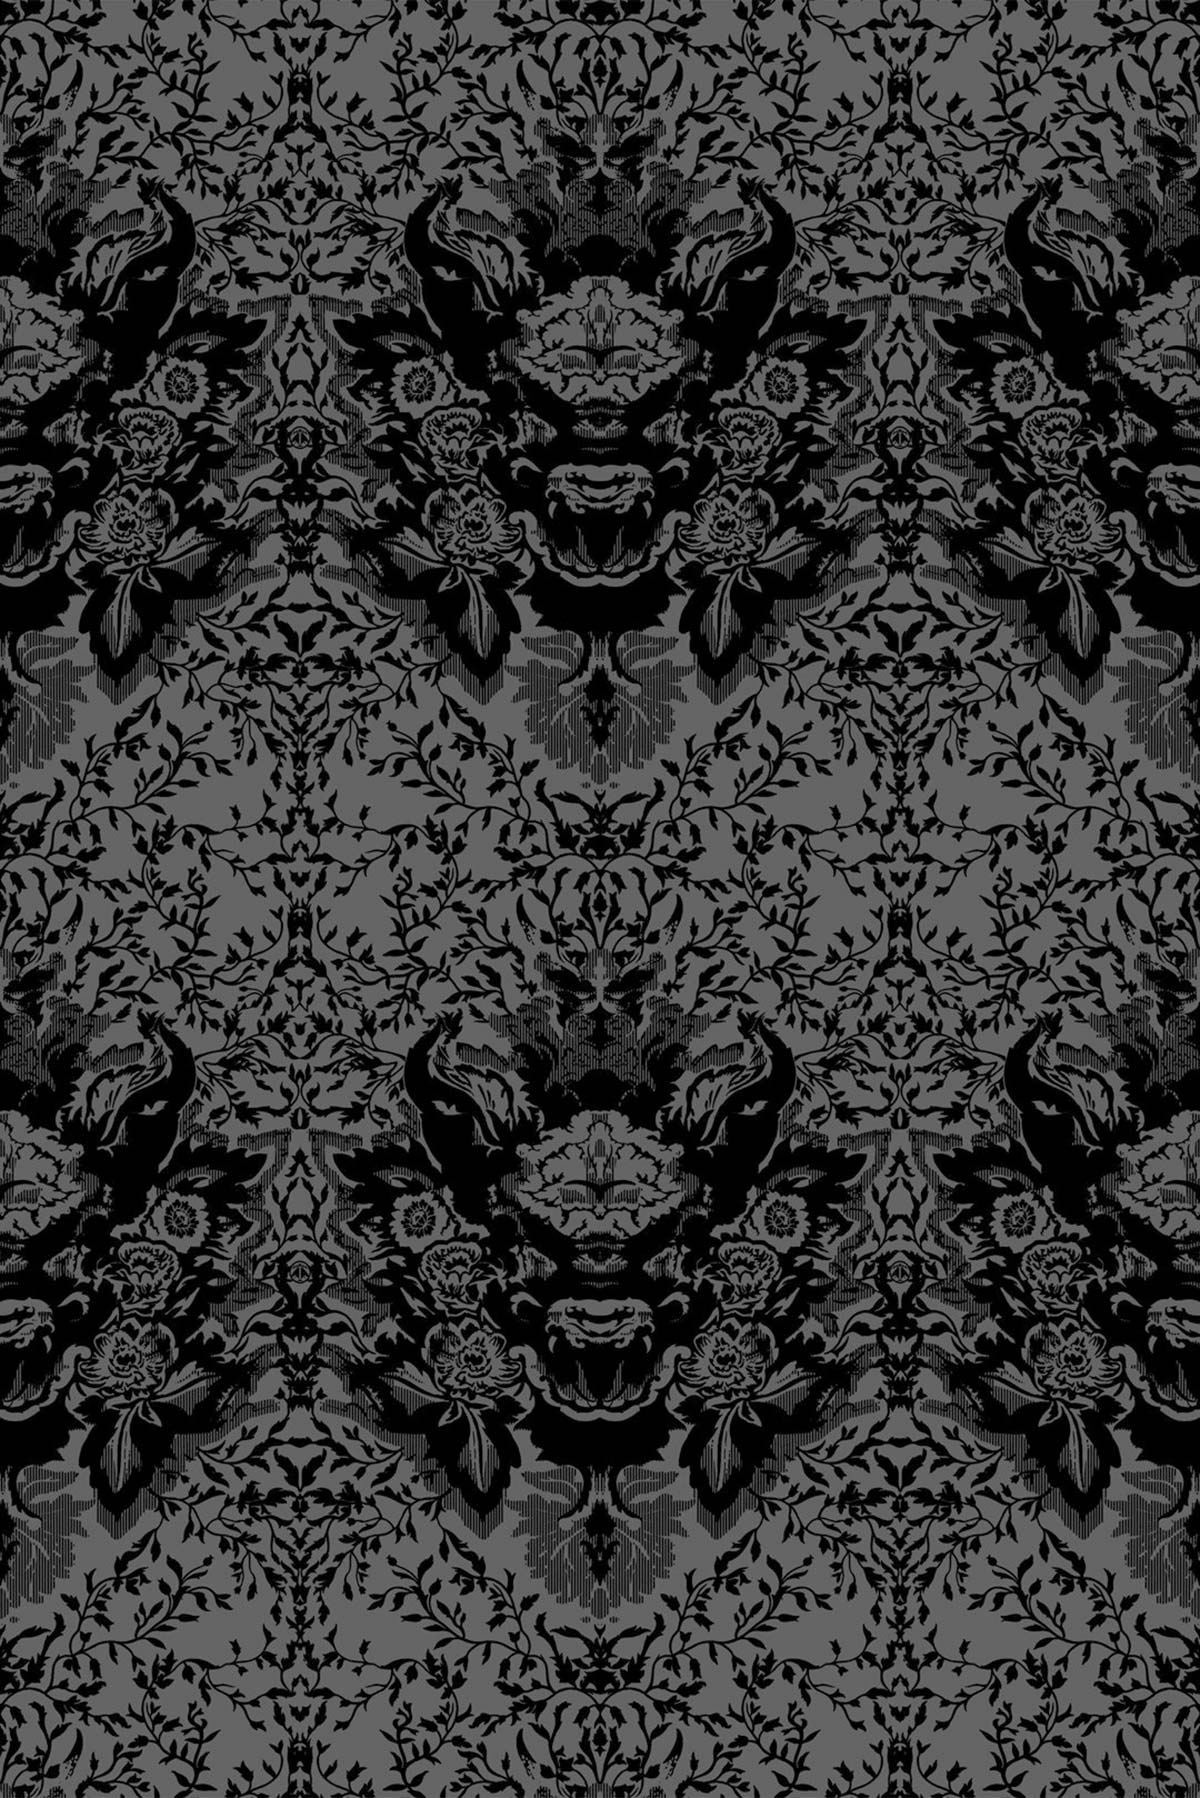 Skull Damask Superwide by Timorous Beasties